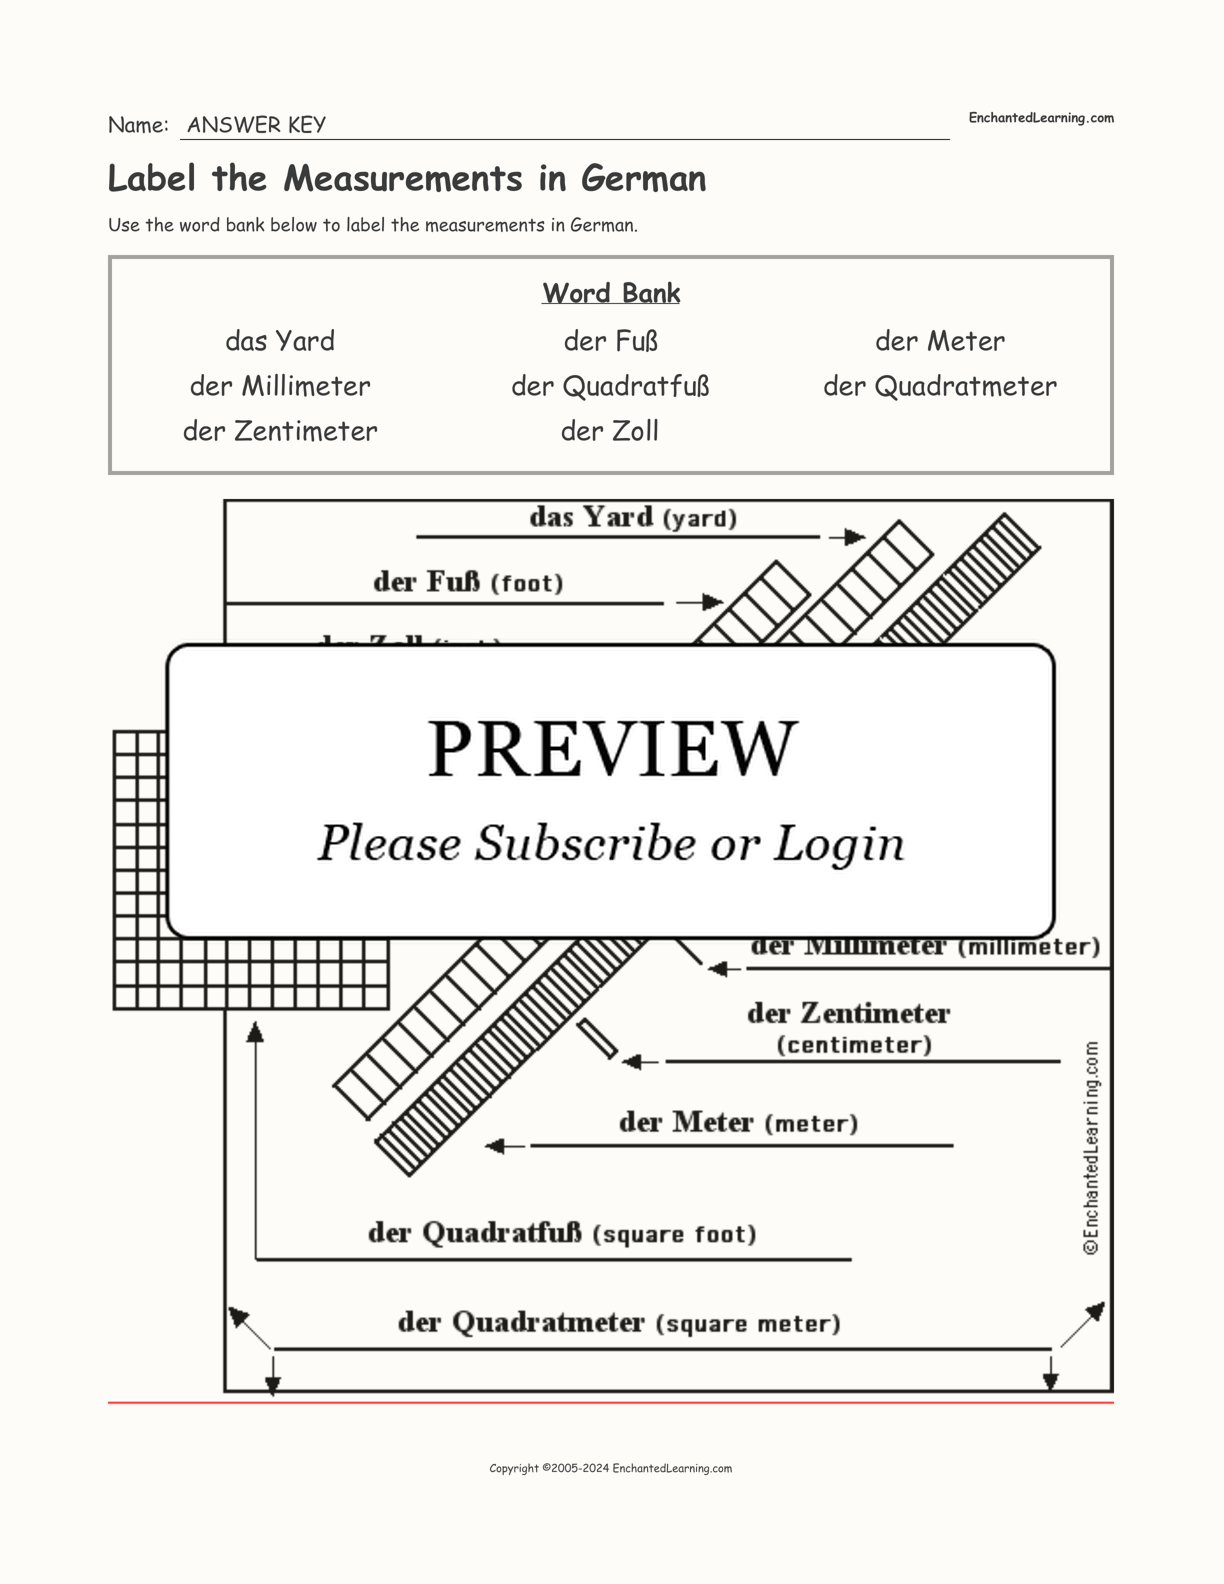 Label the Measurements in German interactive worksheet page 2